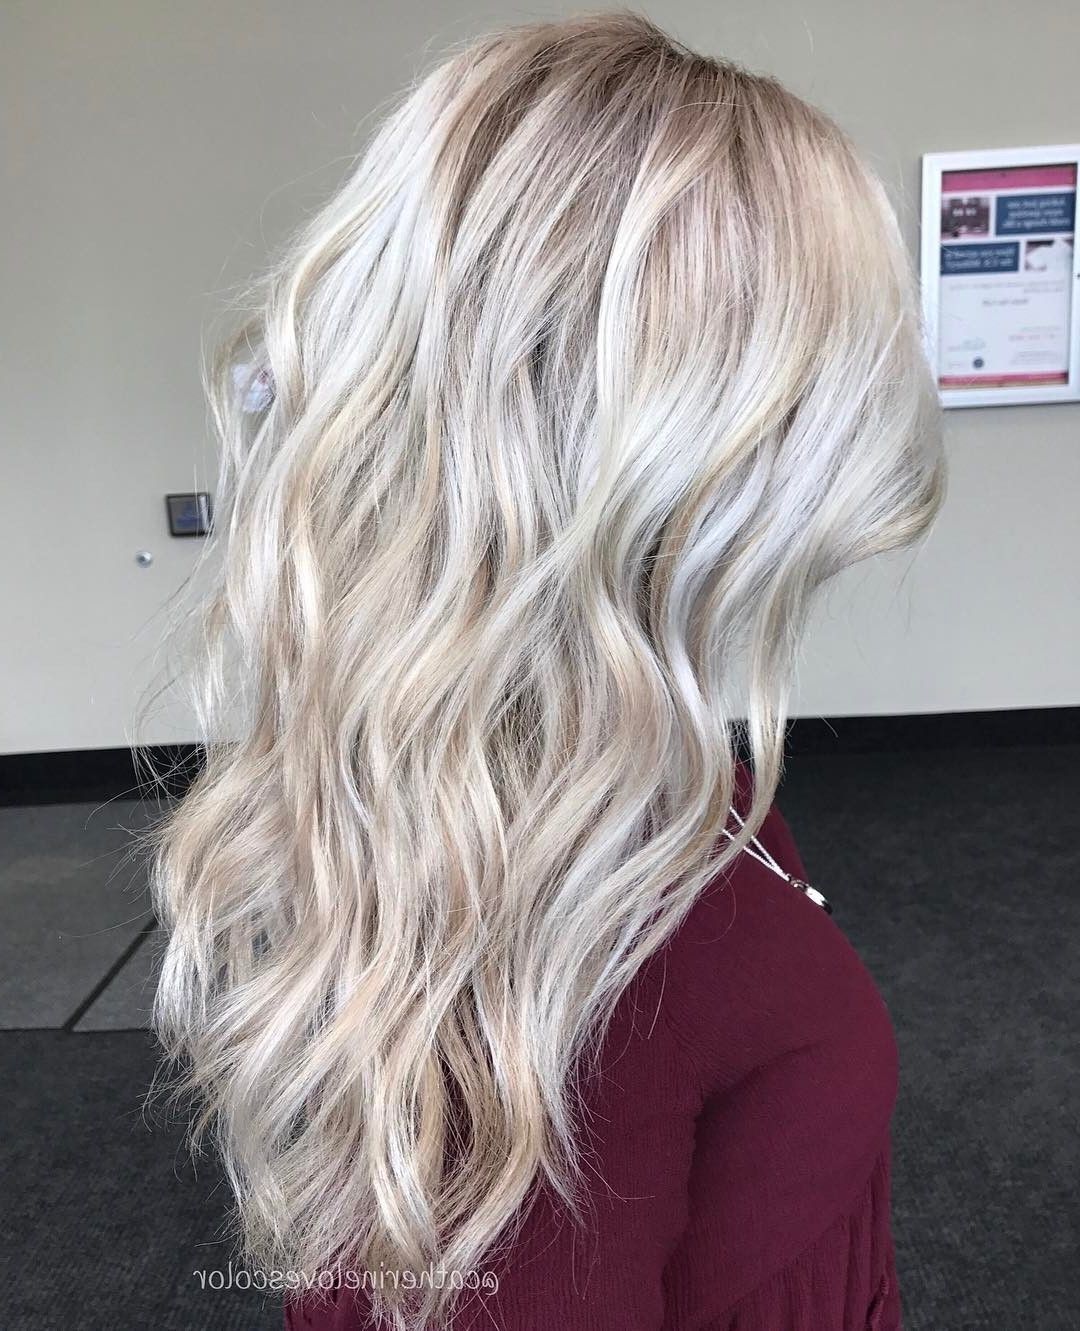 25 Cool Stylish Ash Blonde Hair Color Ideas For Short, Medium, Long Hair Within Preferred Wheat Blonde Hairstyles (Gallery 19 of 20)